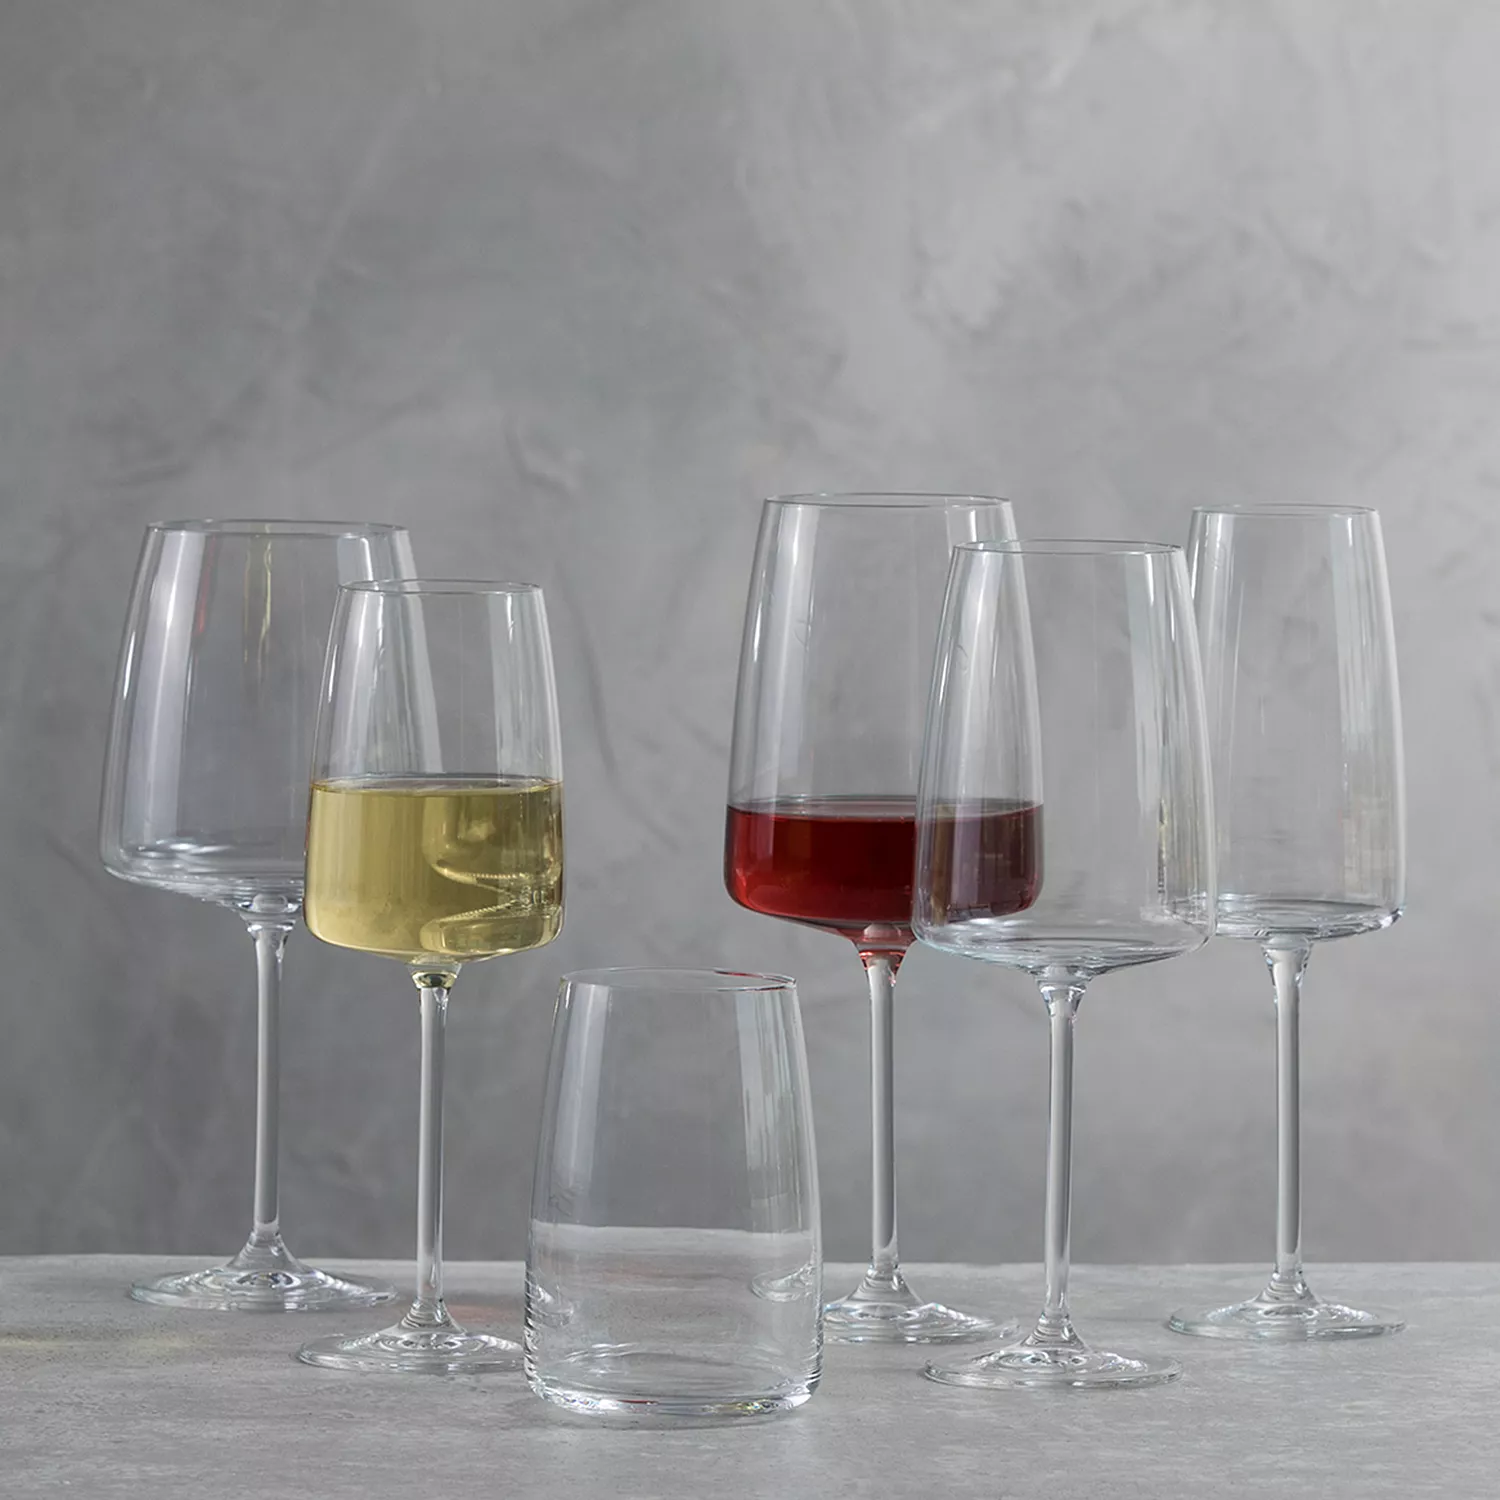 Coccot Wine Glasses Set of 6,Crystal White Wine Glasses,Red Wine